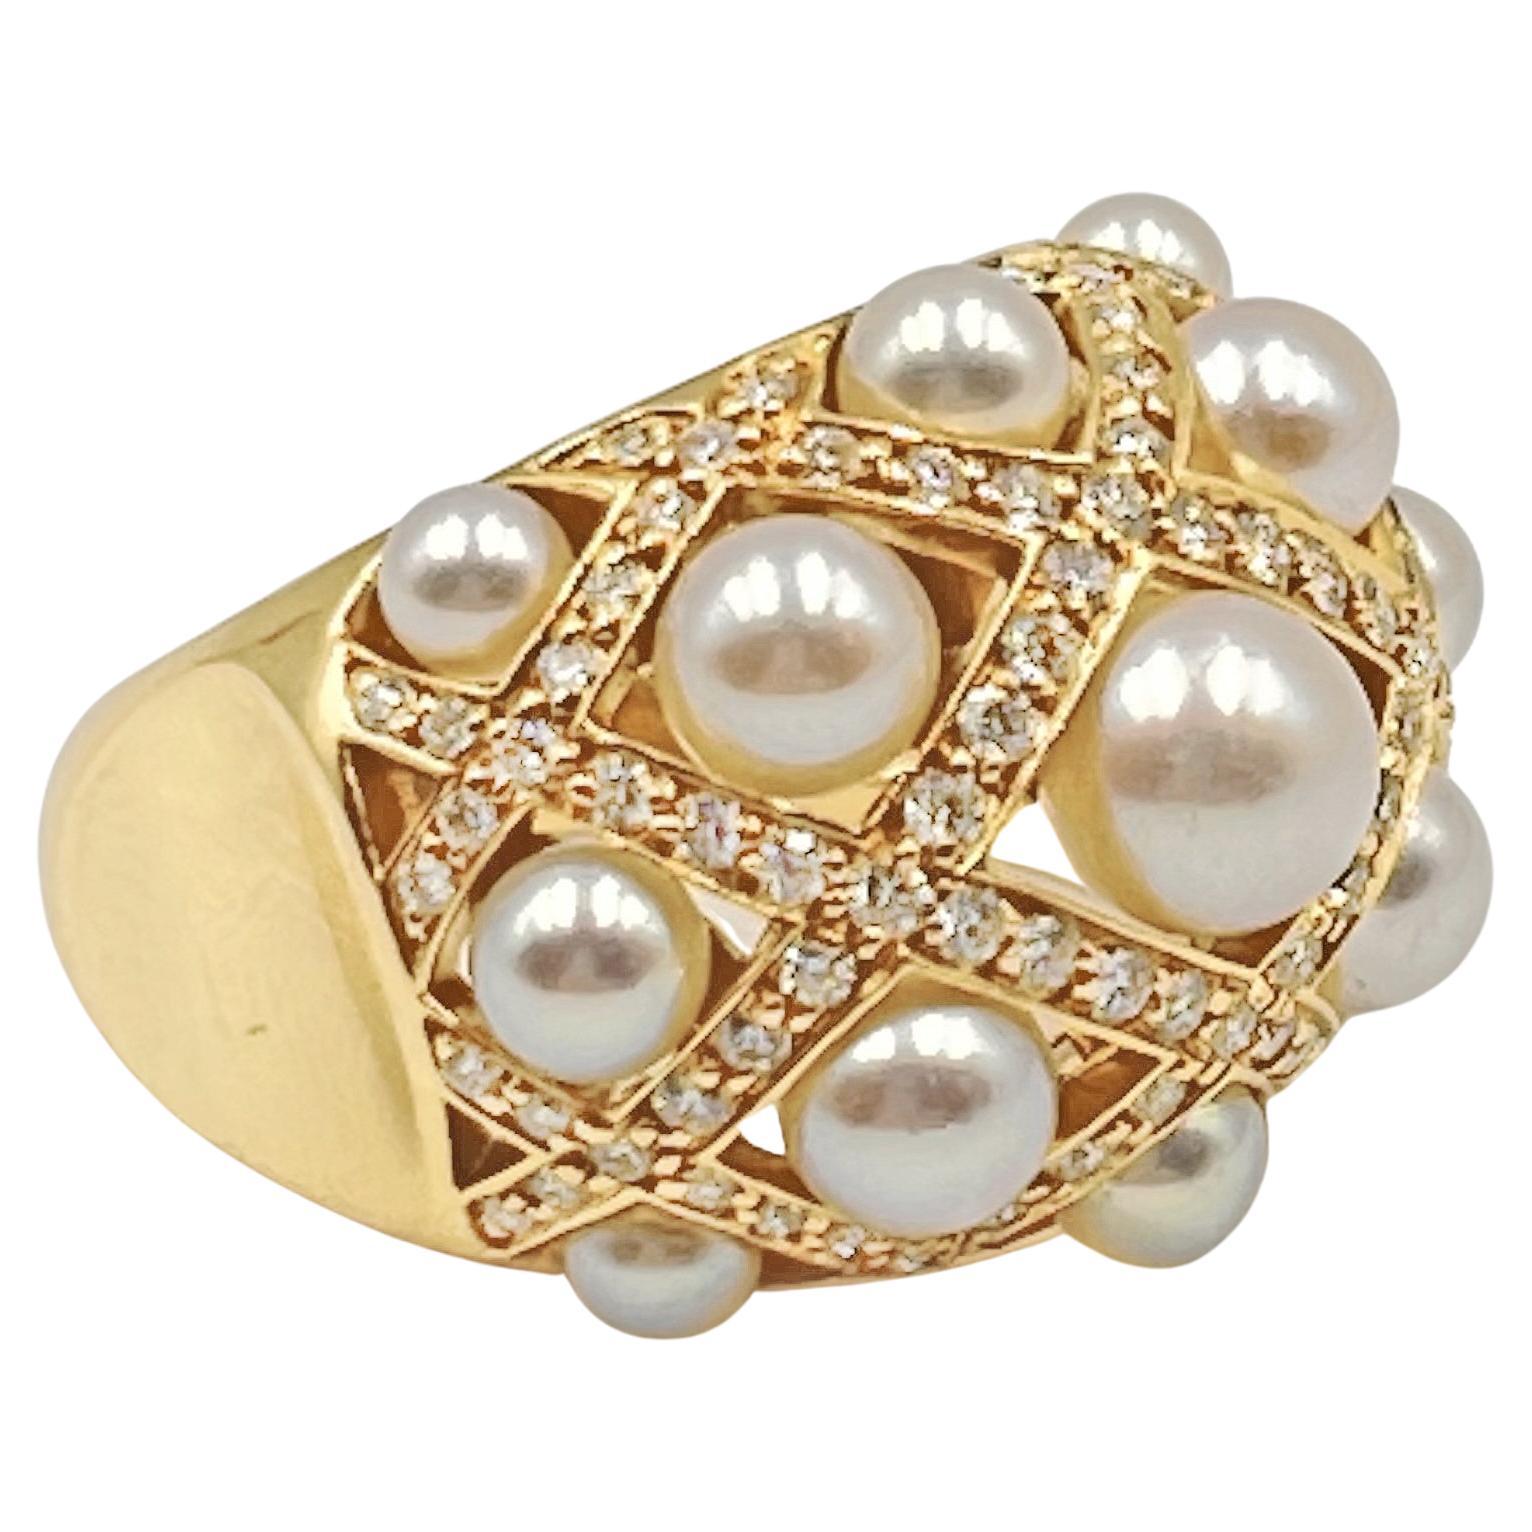 18k yellow gold 'Matelassé' pearl and diamond ring by Chanel.  15.7mm dome design top accented by thirteen cultured pearls (3-6mm) and 108 round full-cut diamonds weighing approximately 1.60 total carats (E-F color, VVS1-VVS2 clarity). 
Tapered 5mm